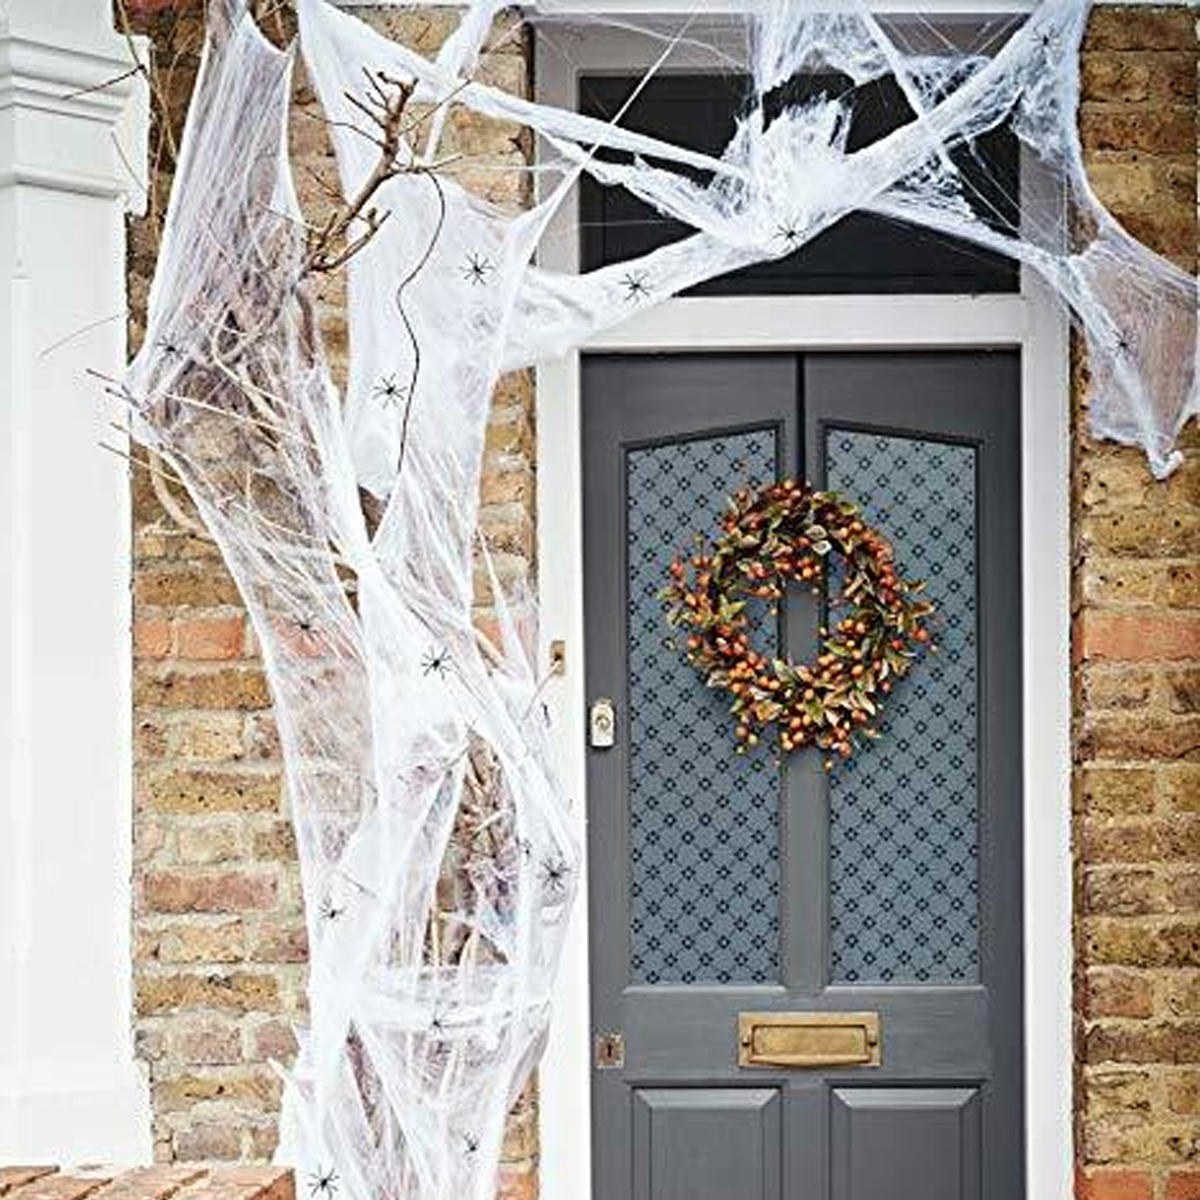 250g-Spider-Web-With-48Pcs-Small-Spiders-Halloween-Outdoor-Party-Decorations-Props-Supplies-1730880-5